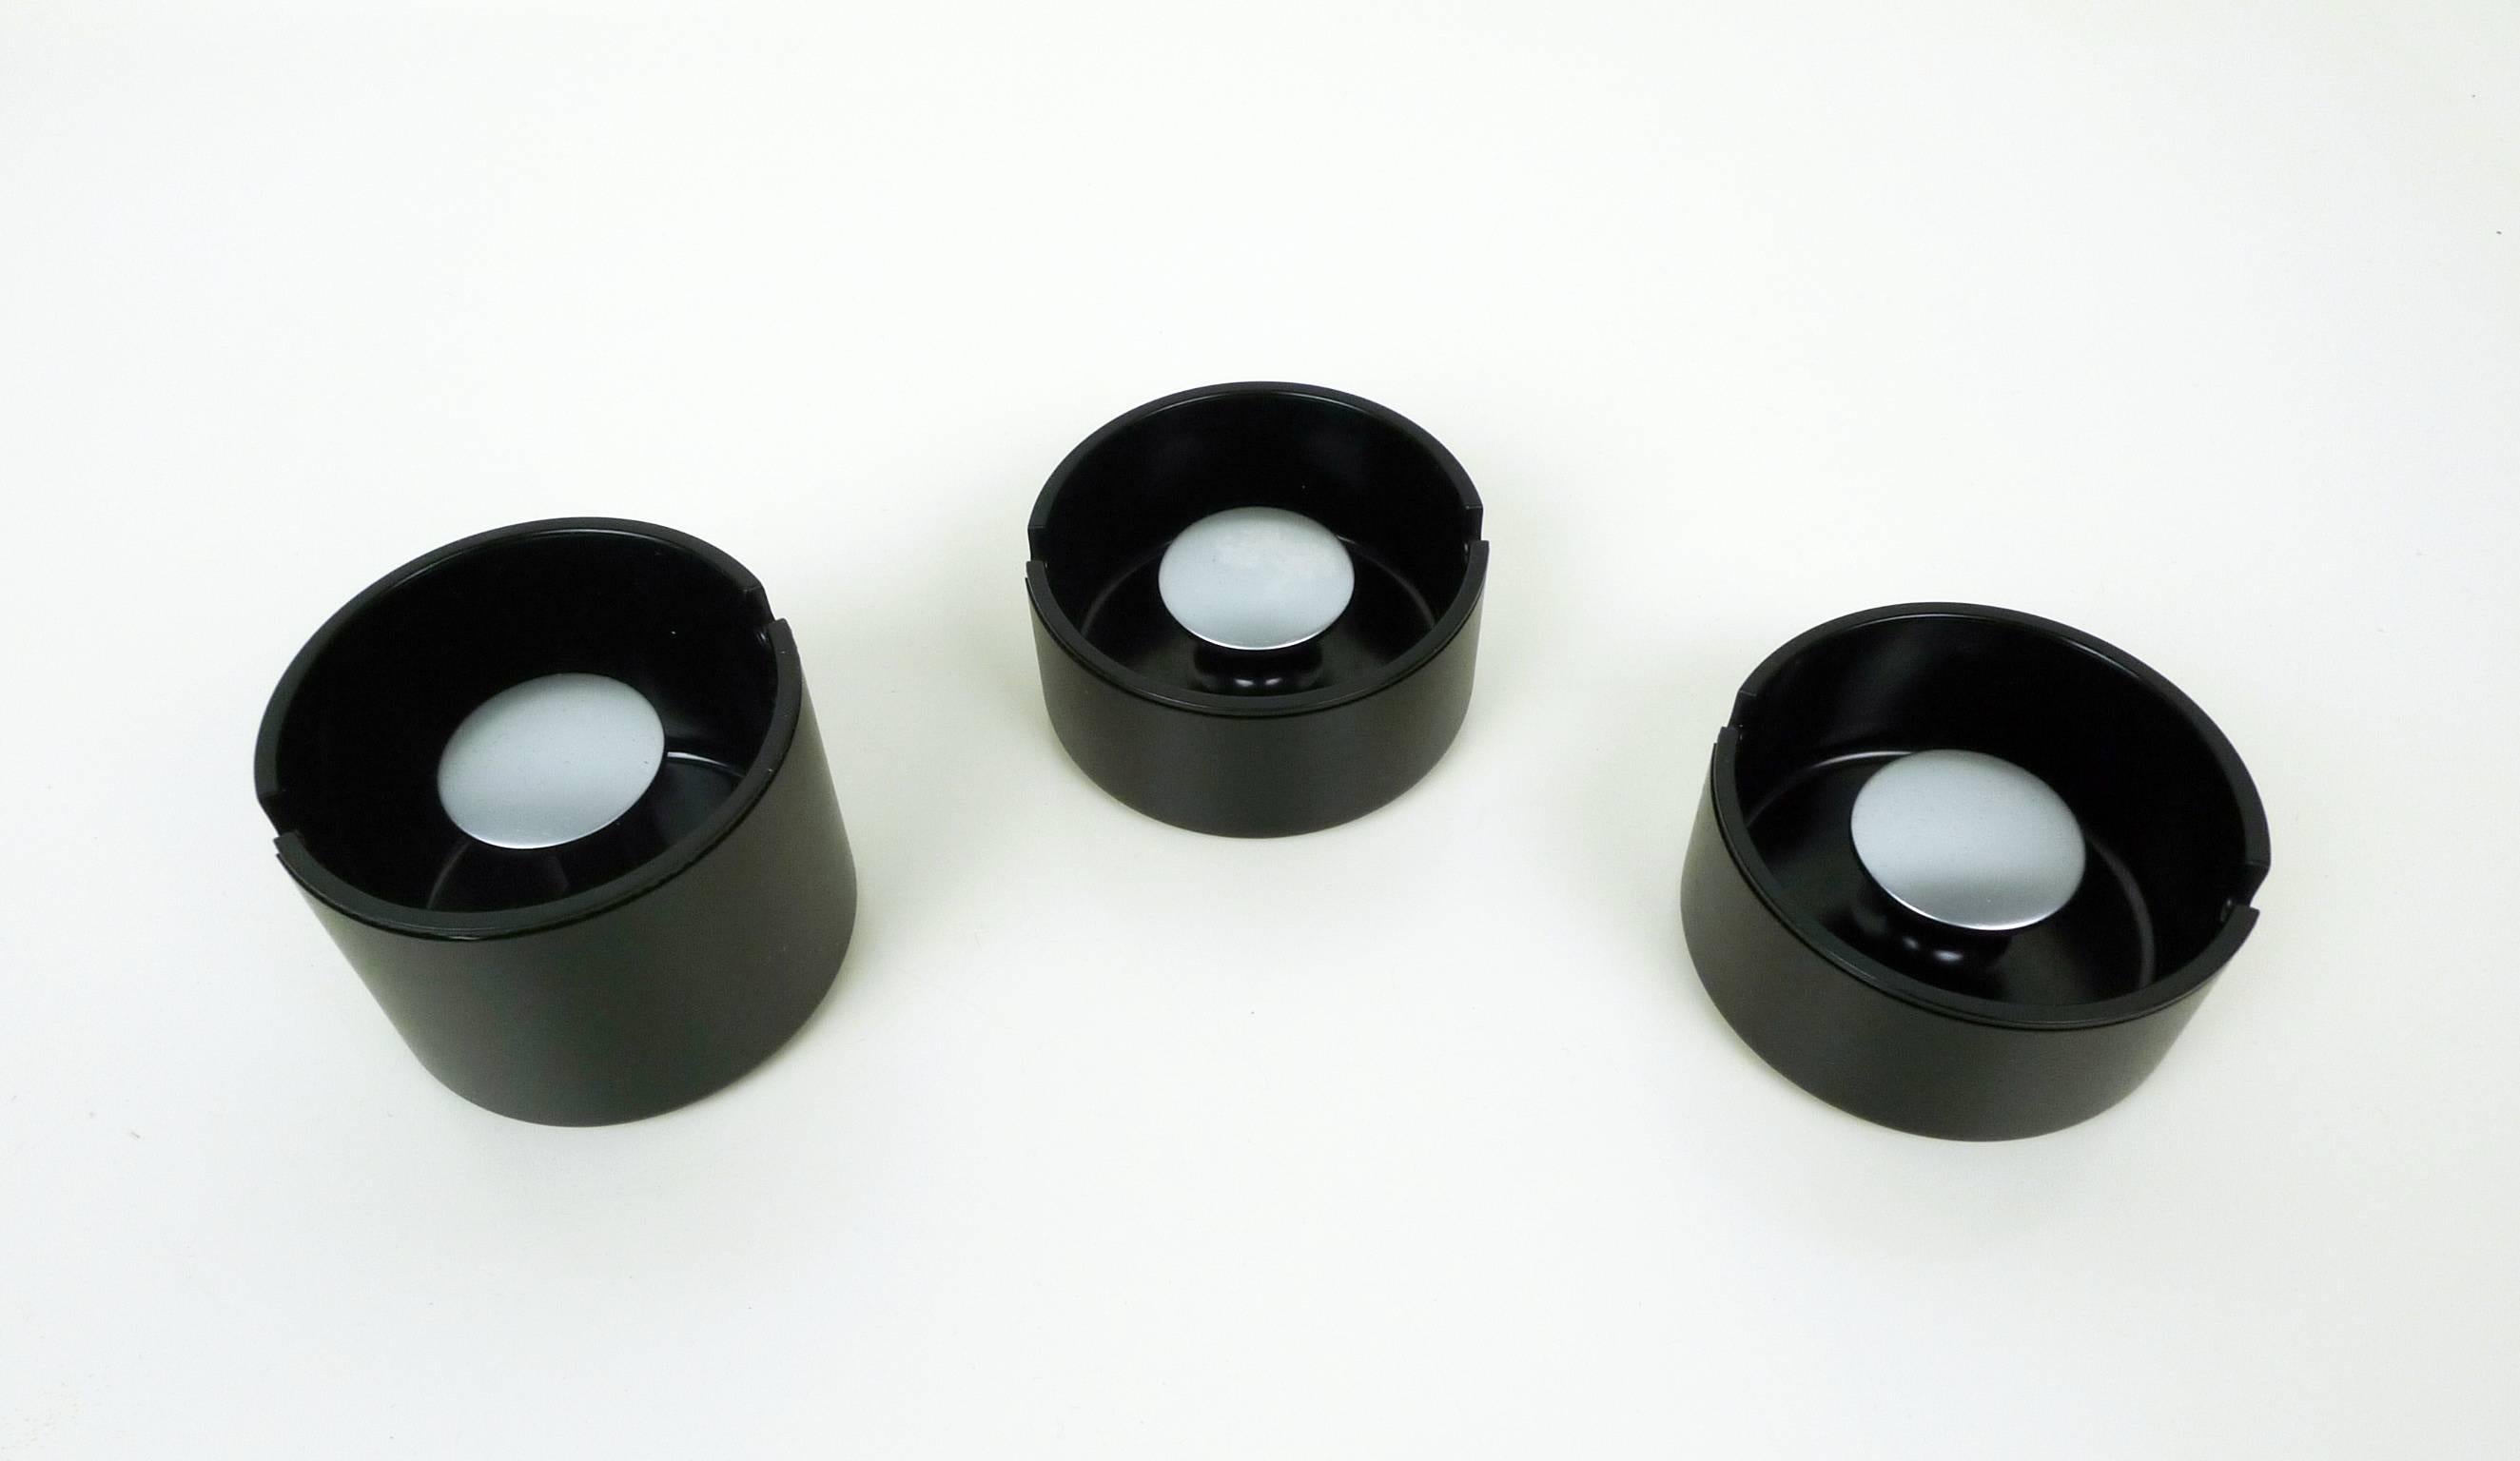 Set of three stackable ashtrays by Dieter Rams from the 1970s. They were produced by Braun in Ireland. The two low ashtrays have a diameter of 7.5 cm and a height of 3.7 cm. The larger ashtray is 5.7 cm high. All ashtrays are unused and in very good